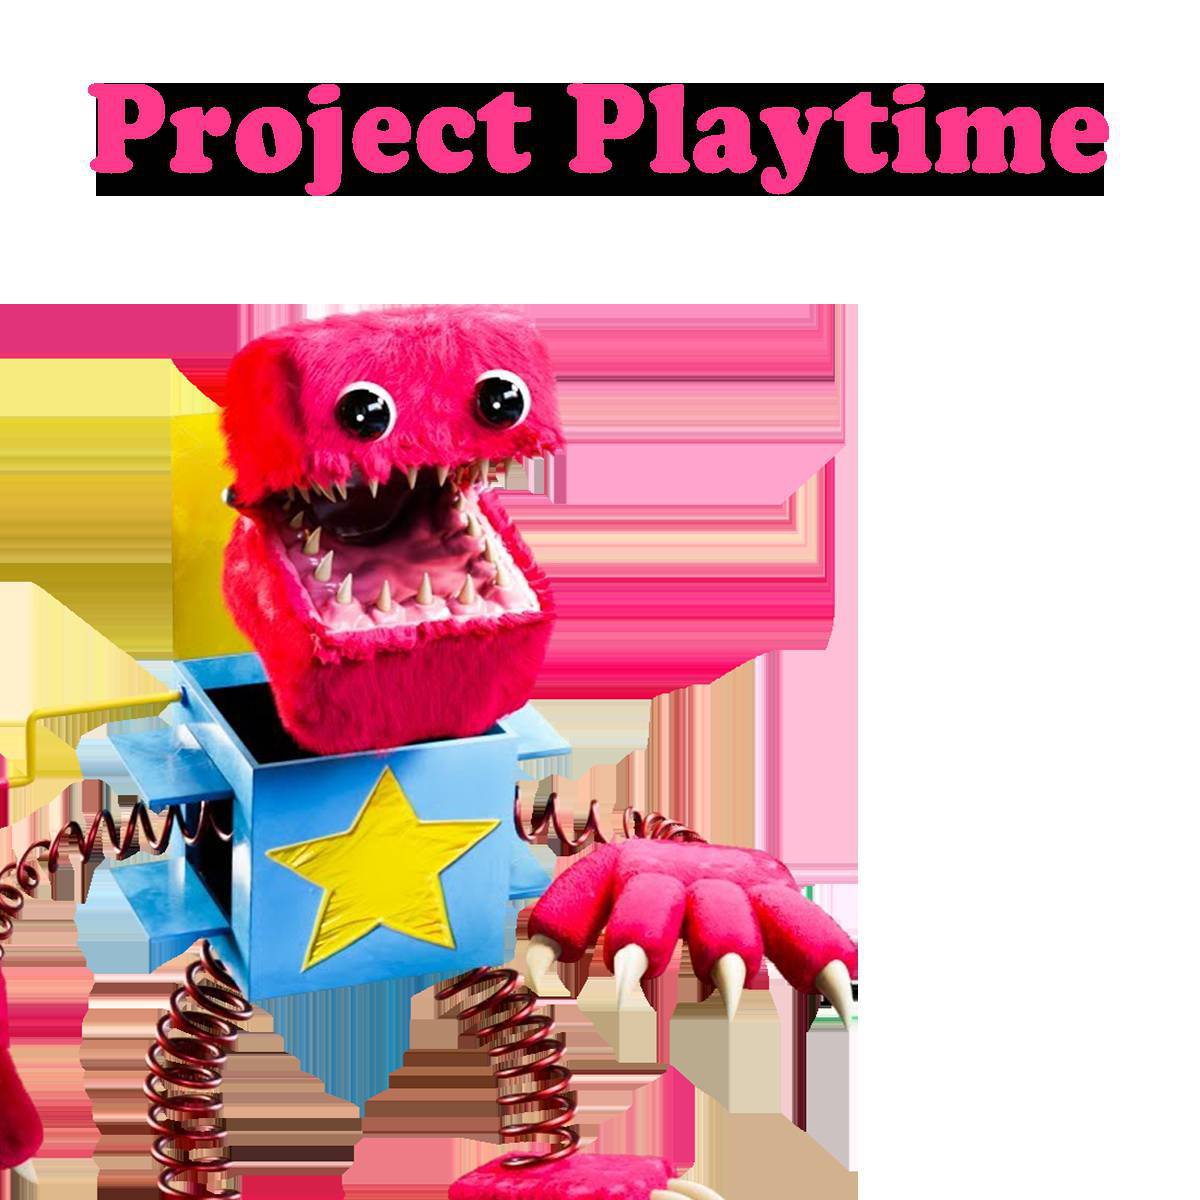 Project playtime #2